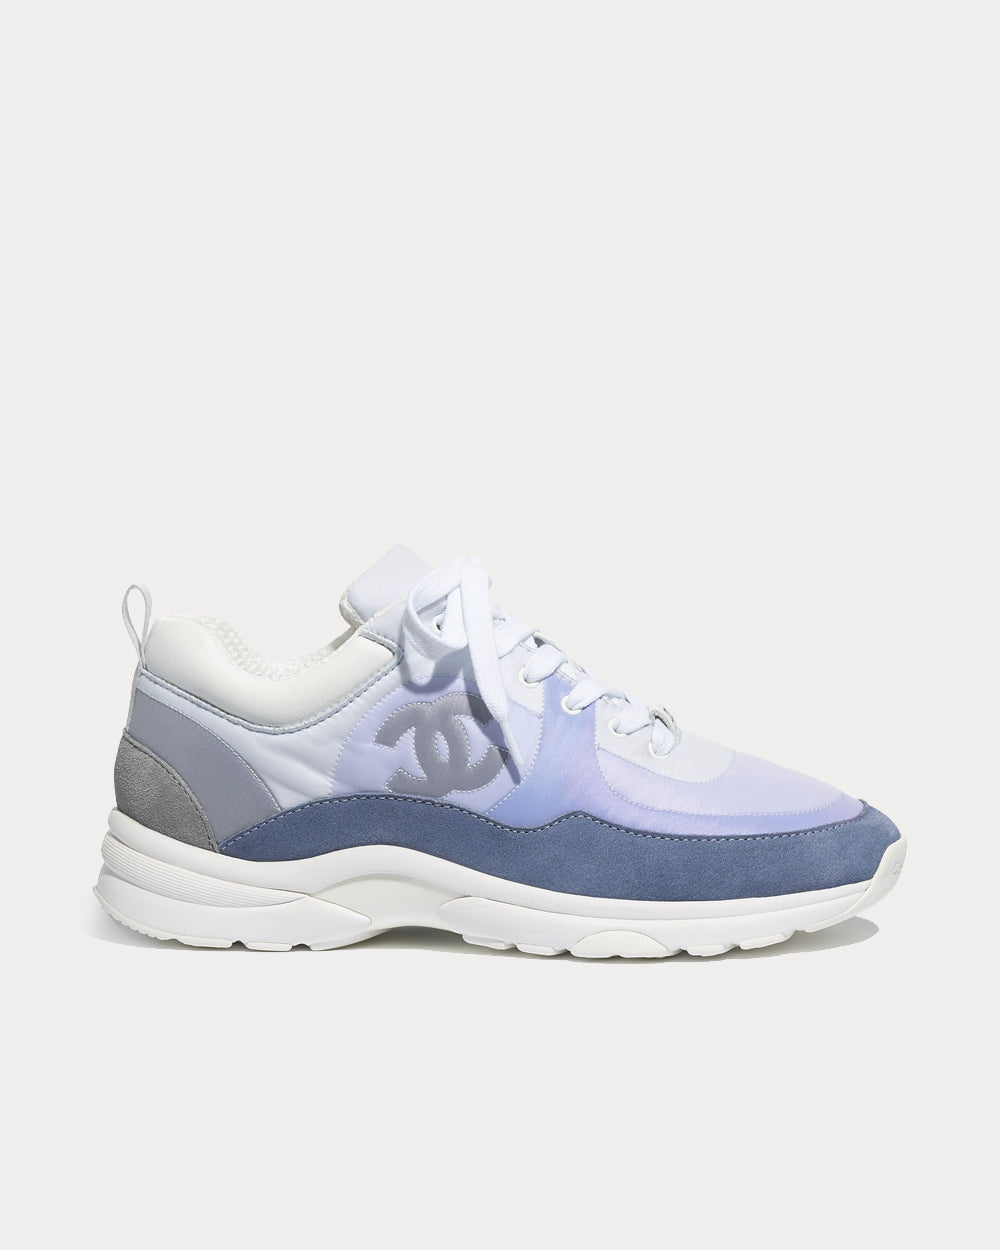 Chanel Suede Sky Blue Sneakers - Skyblue